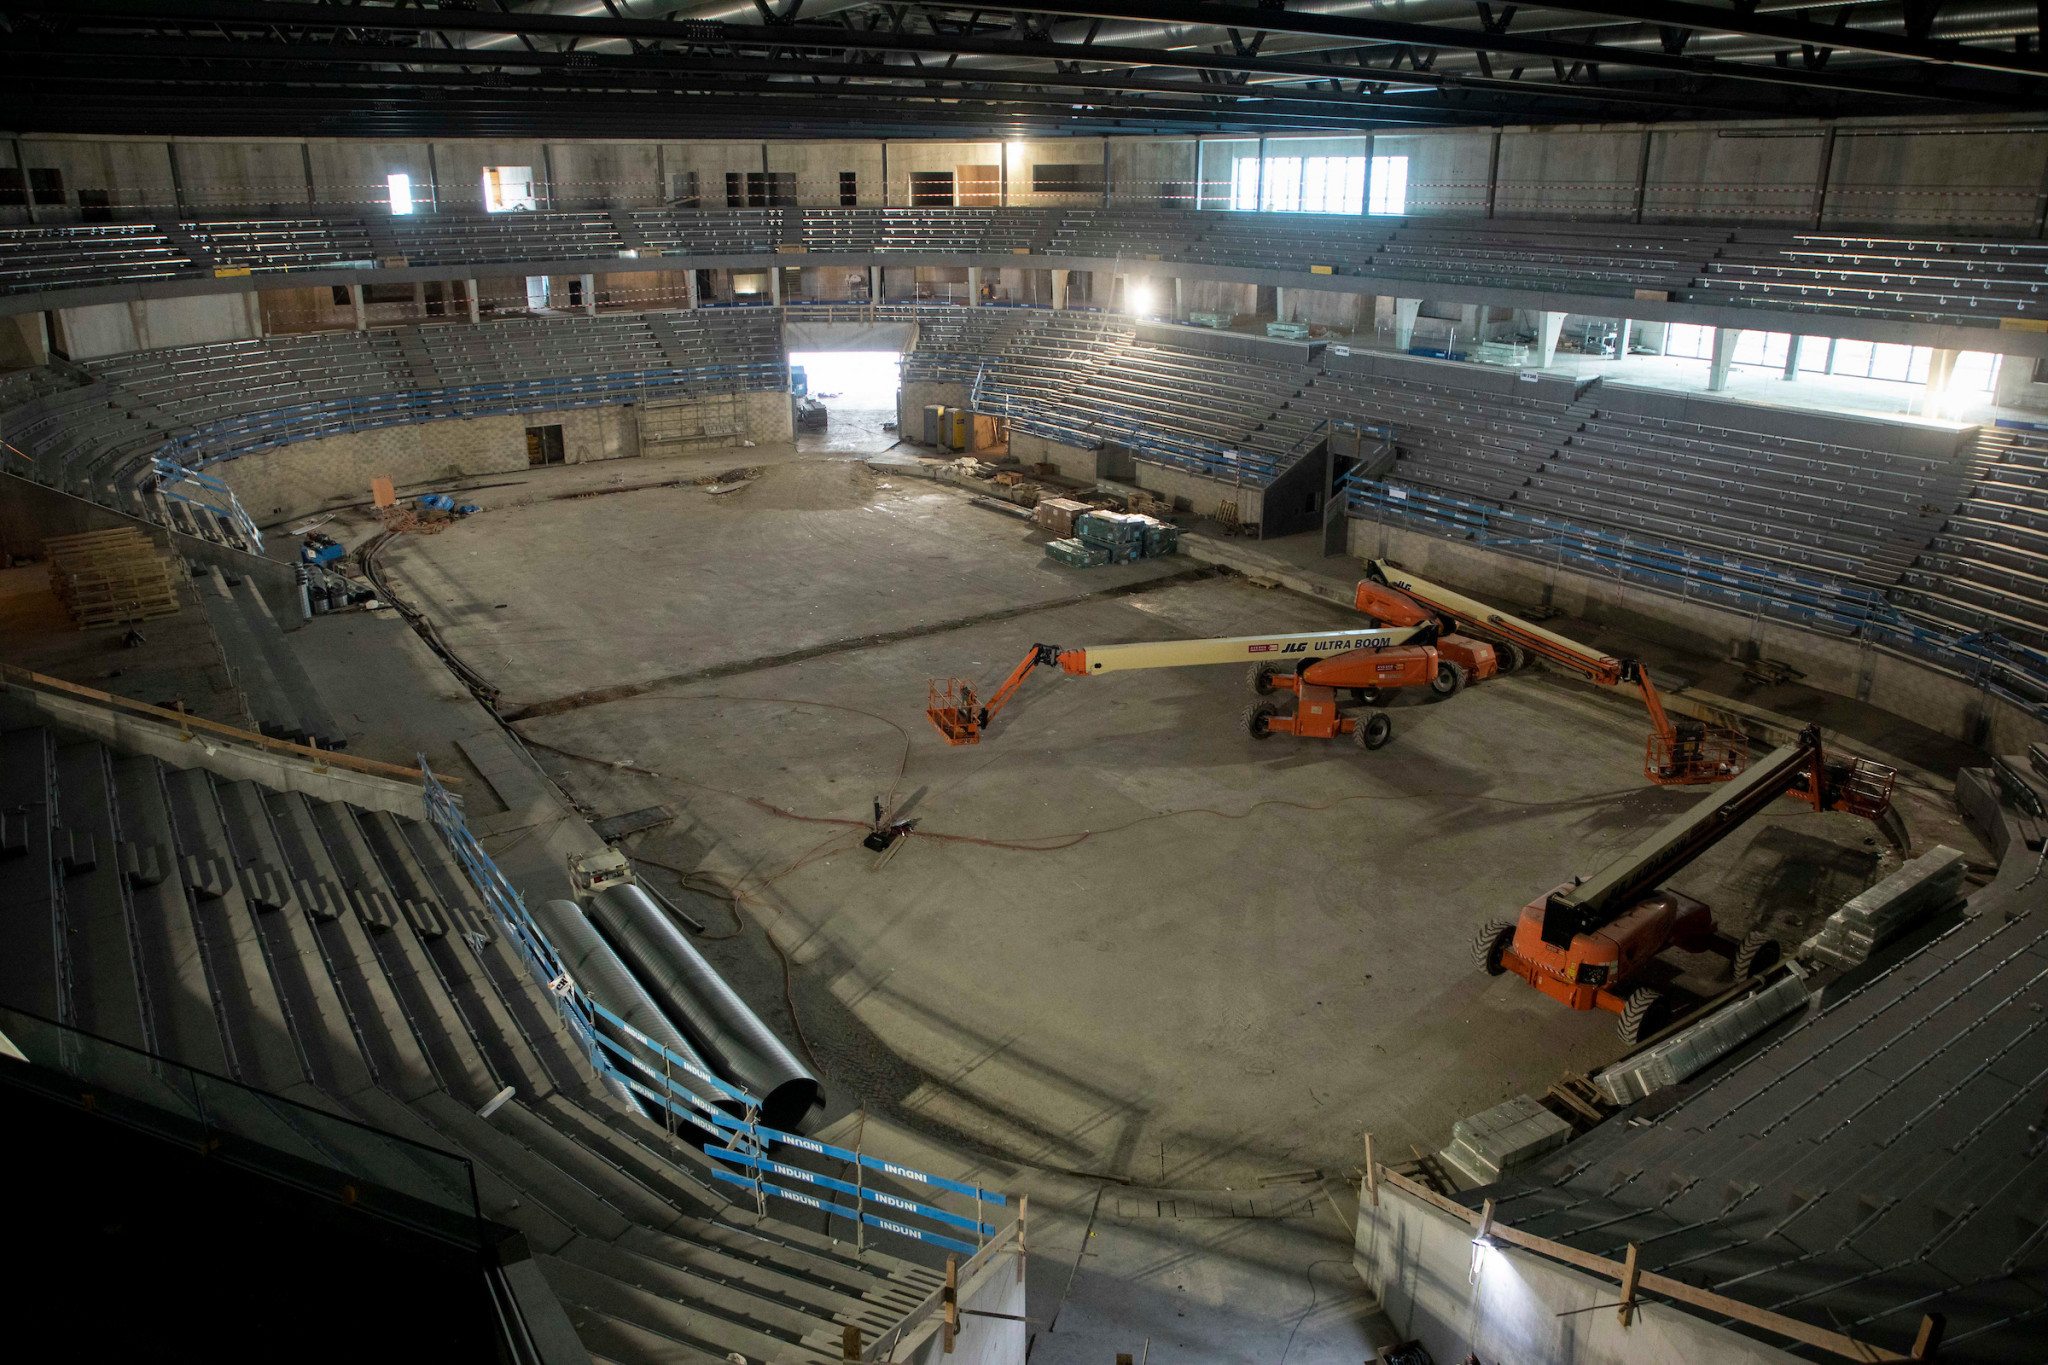 A new ice hockey arena, which will also host the Opening Ceremony, is also being built for Lausanne 2020 ©IOC